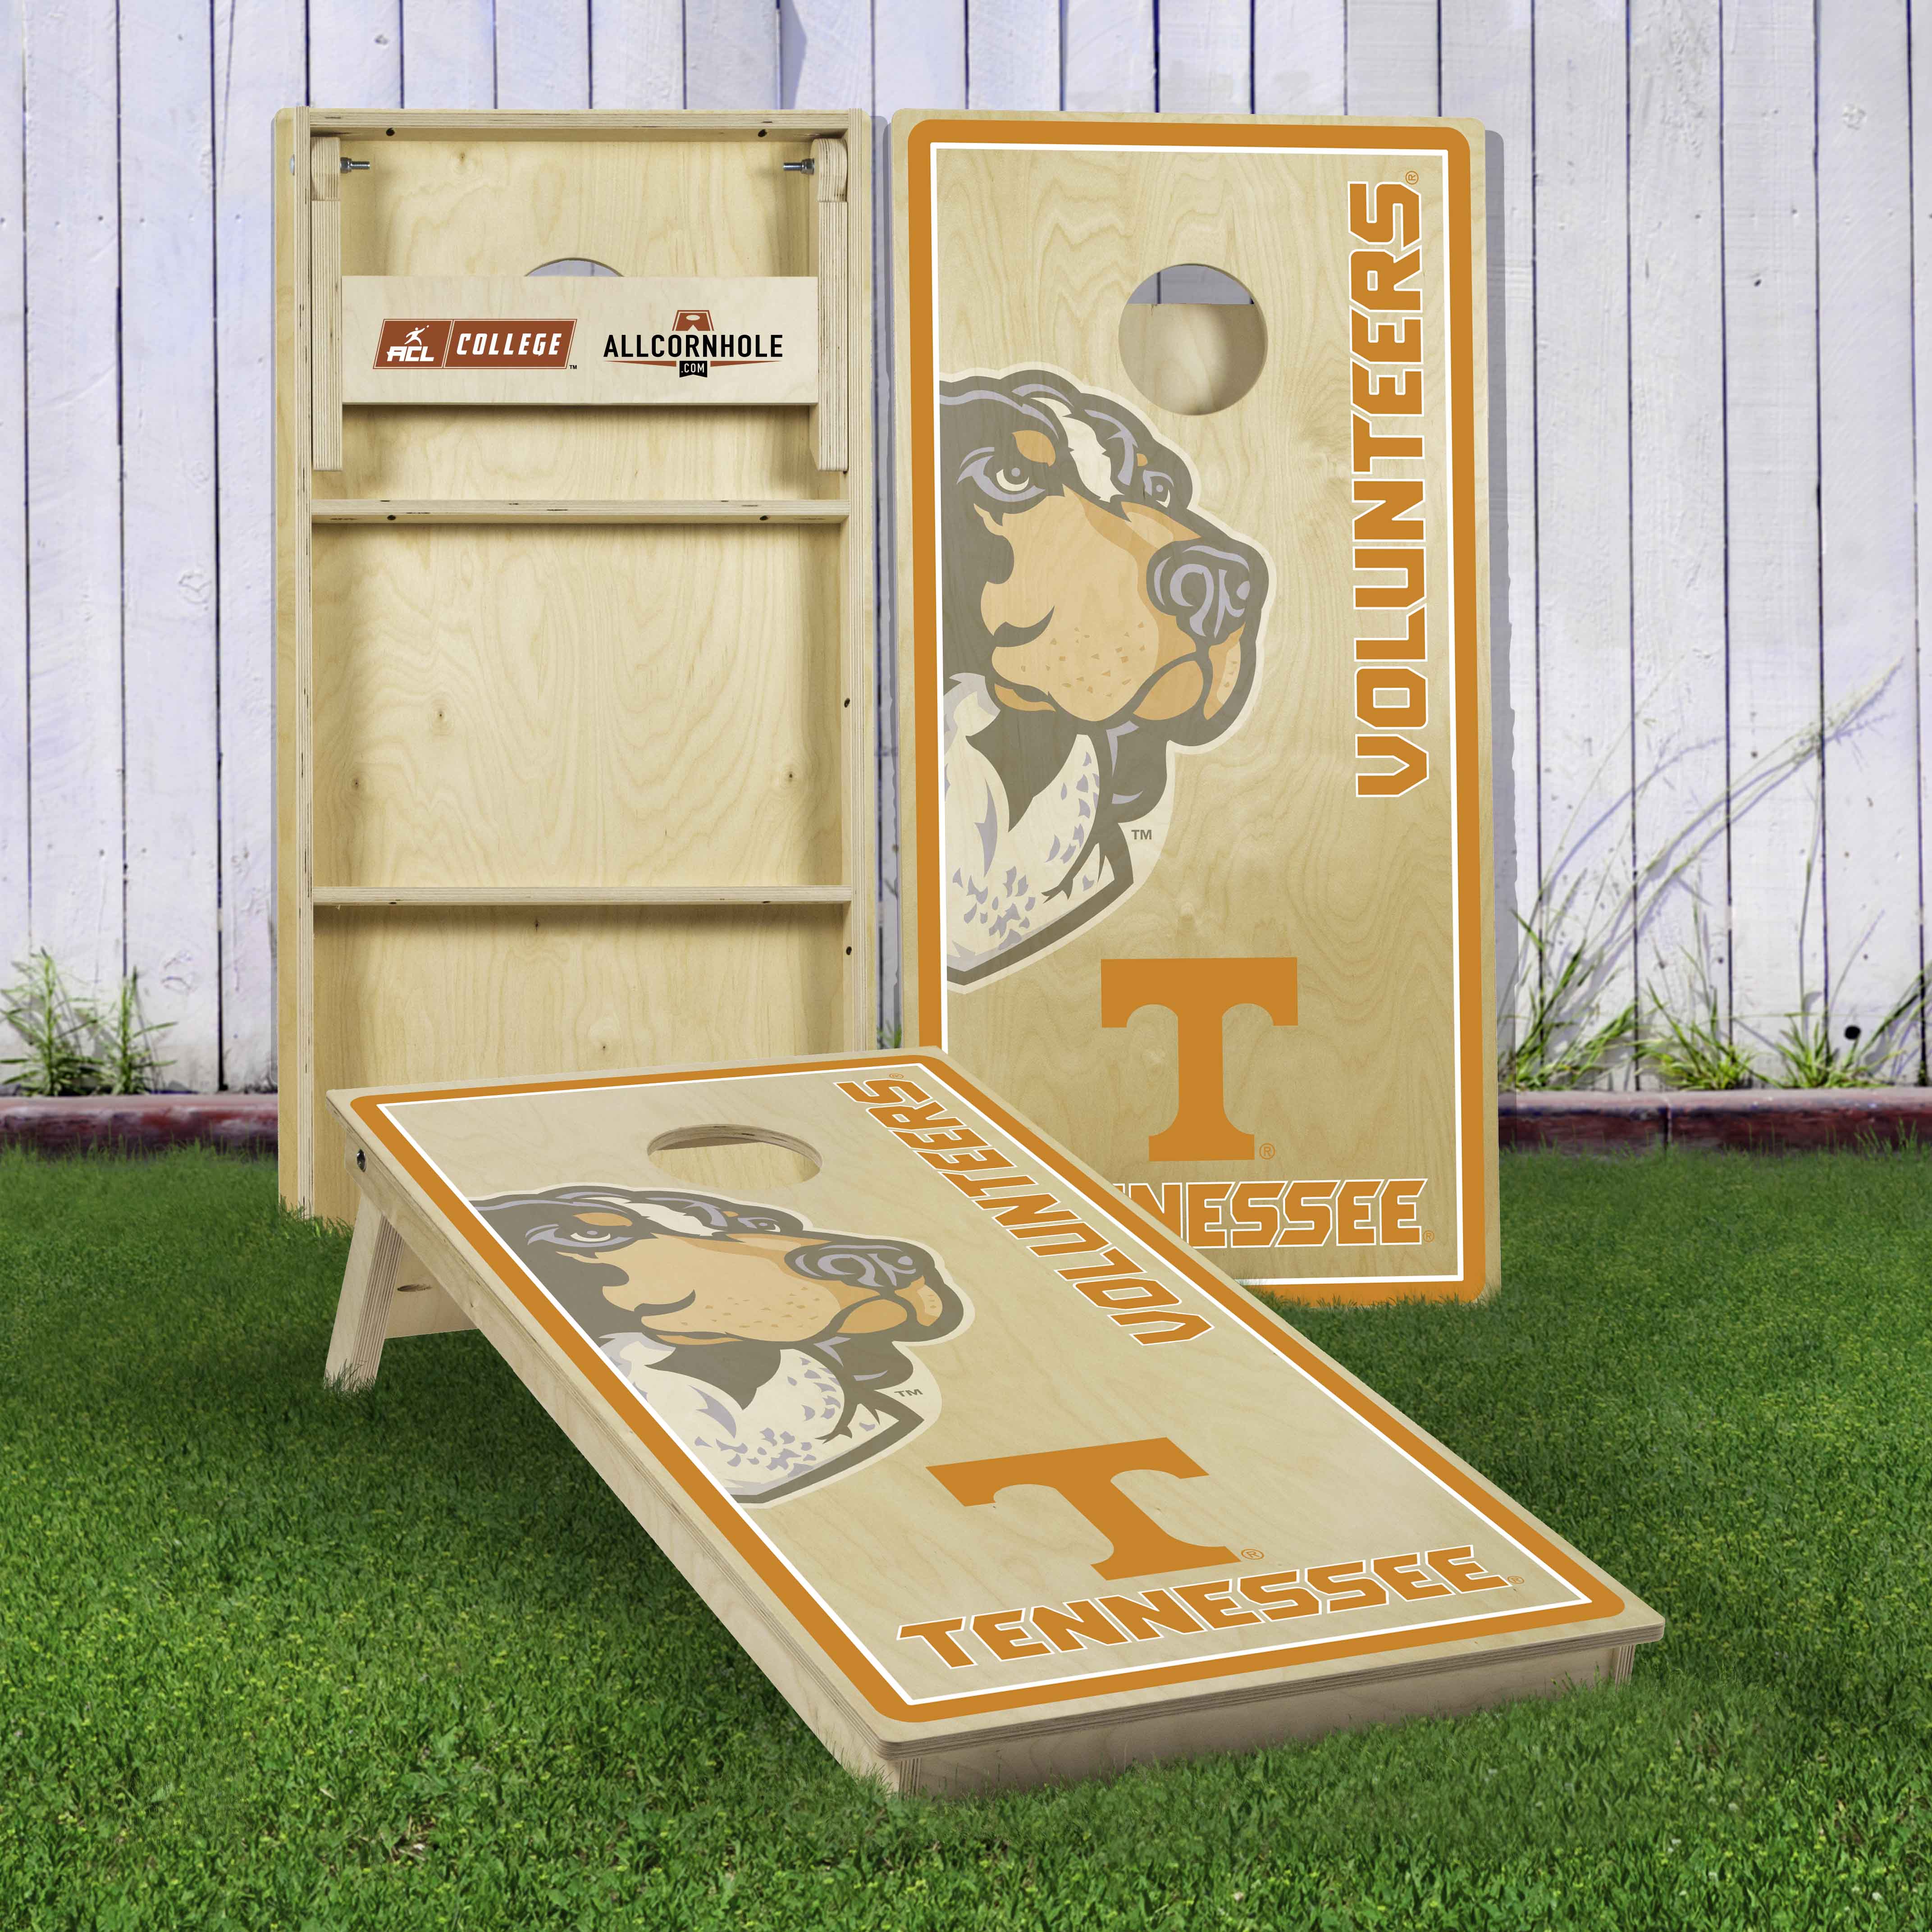 Officially Licensed Collegiate Cornhole Boards - University of Tennessee